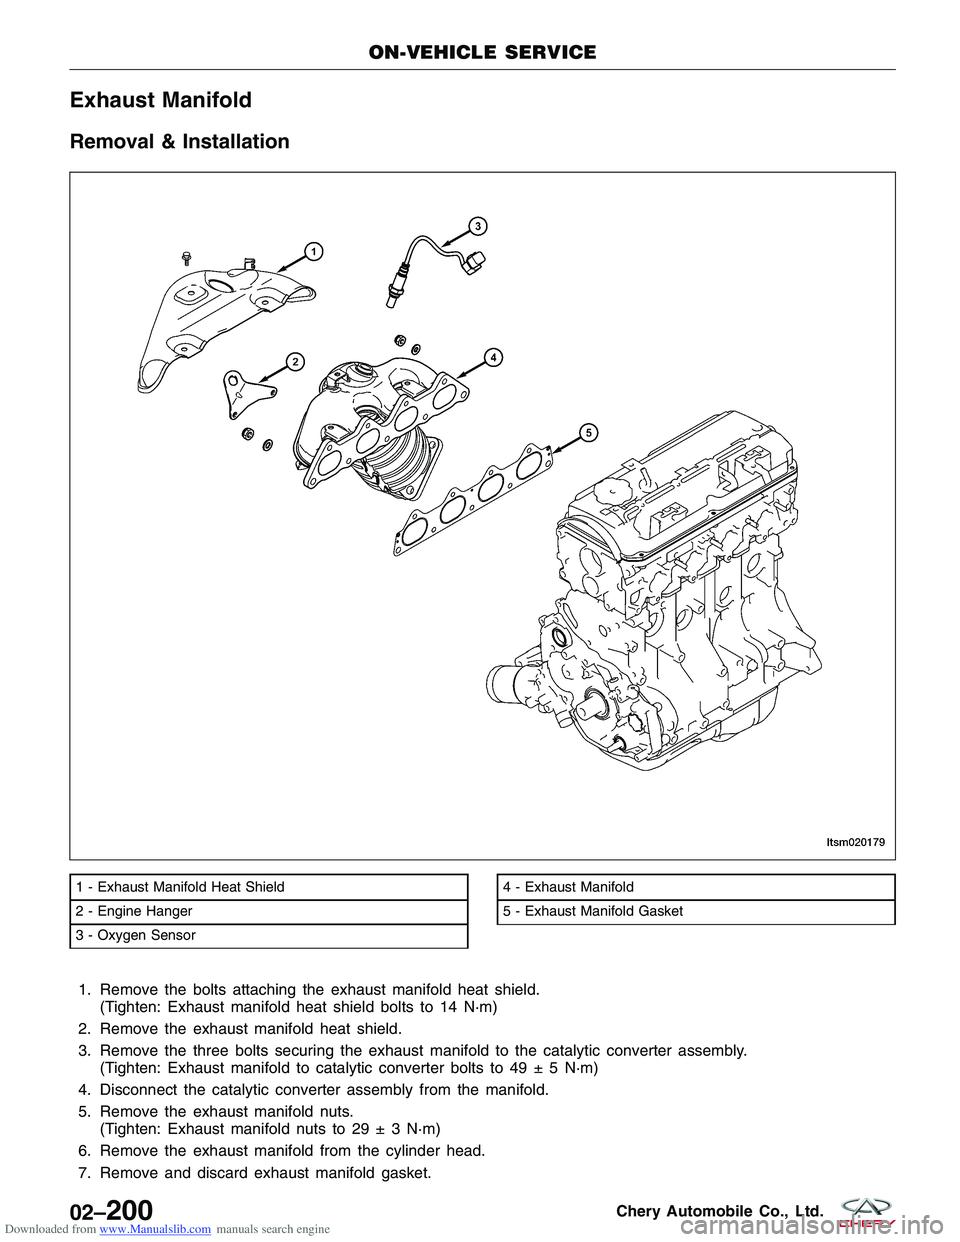 CHERY TIGGO 2009  Service Repair Manual Downloaded from www.Manualslib.com manuals search engine Exhaust Manifold
Removal & Installation
1. Remove the bolts attaching the exhaust manifold heat shield.(Tighten: Exhaust manifold heat shield b